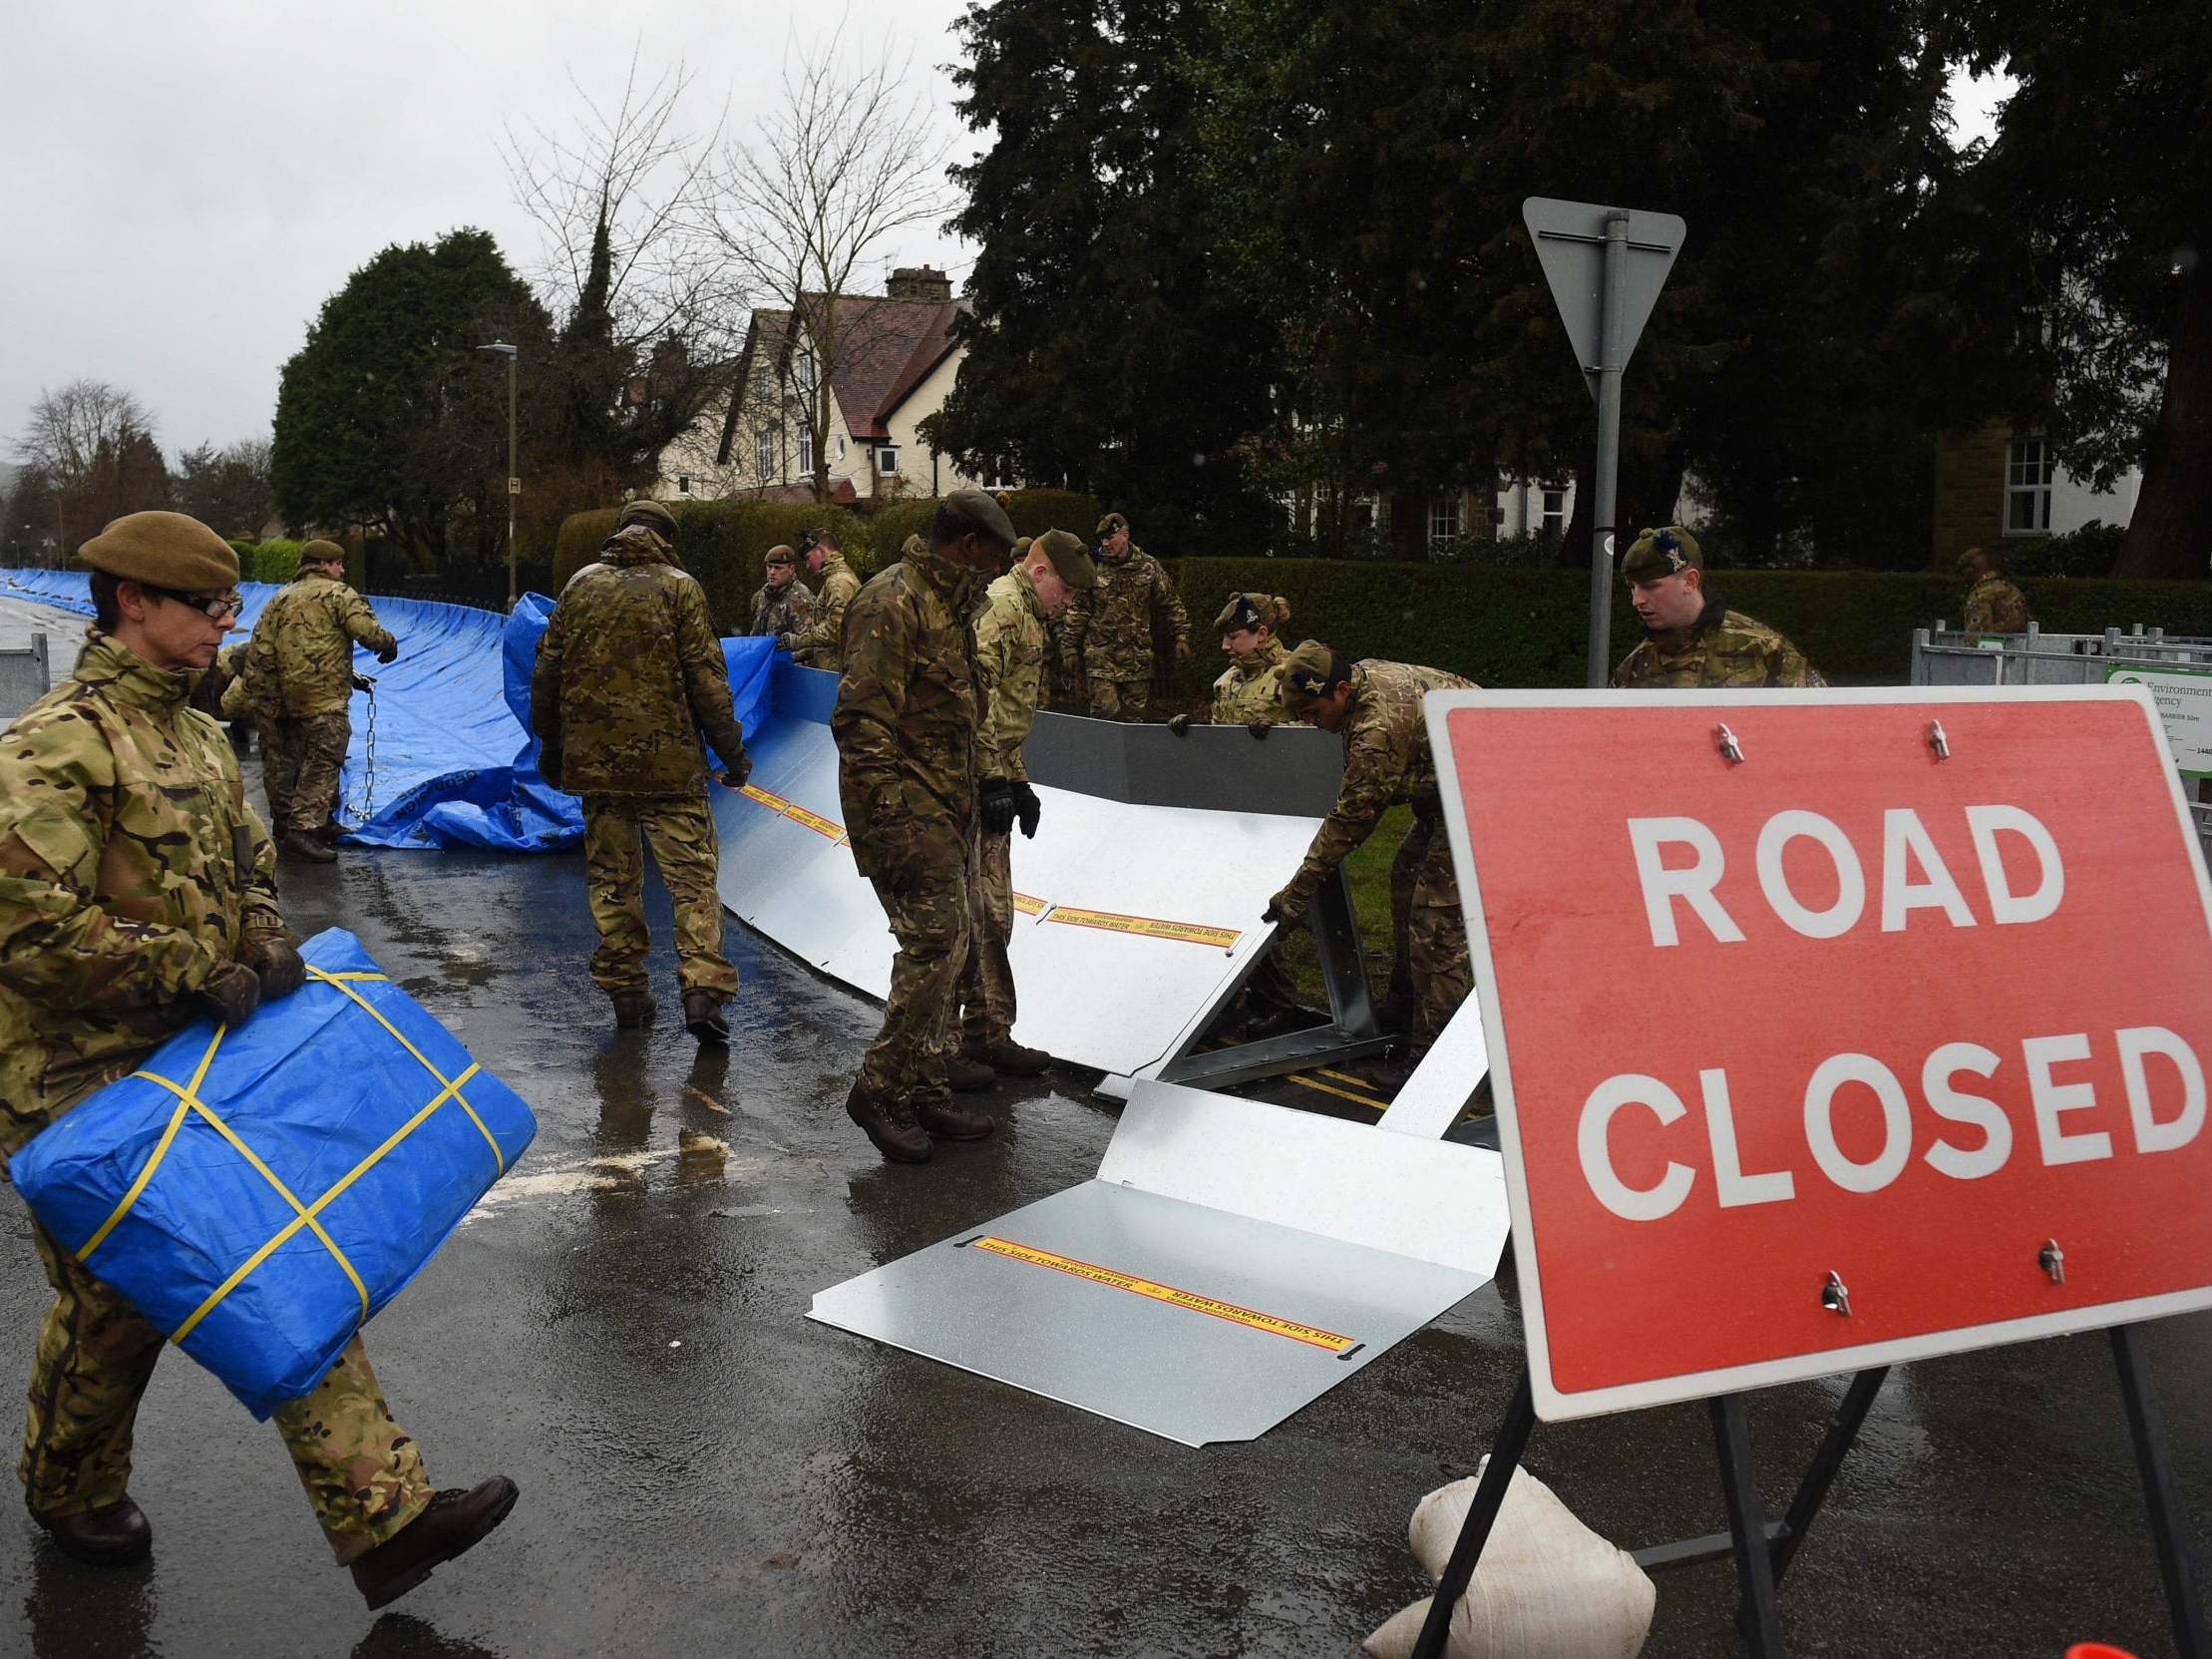 Members of the 4th Battalion Royal Regiment of Scotland erect flood barricades in Ilkley, West Yorkshire earlier this year